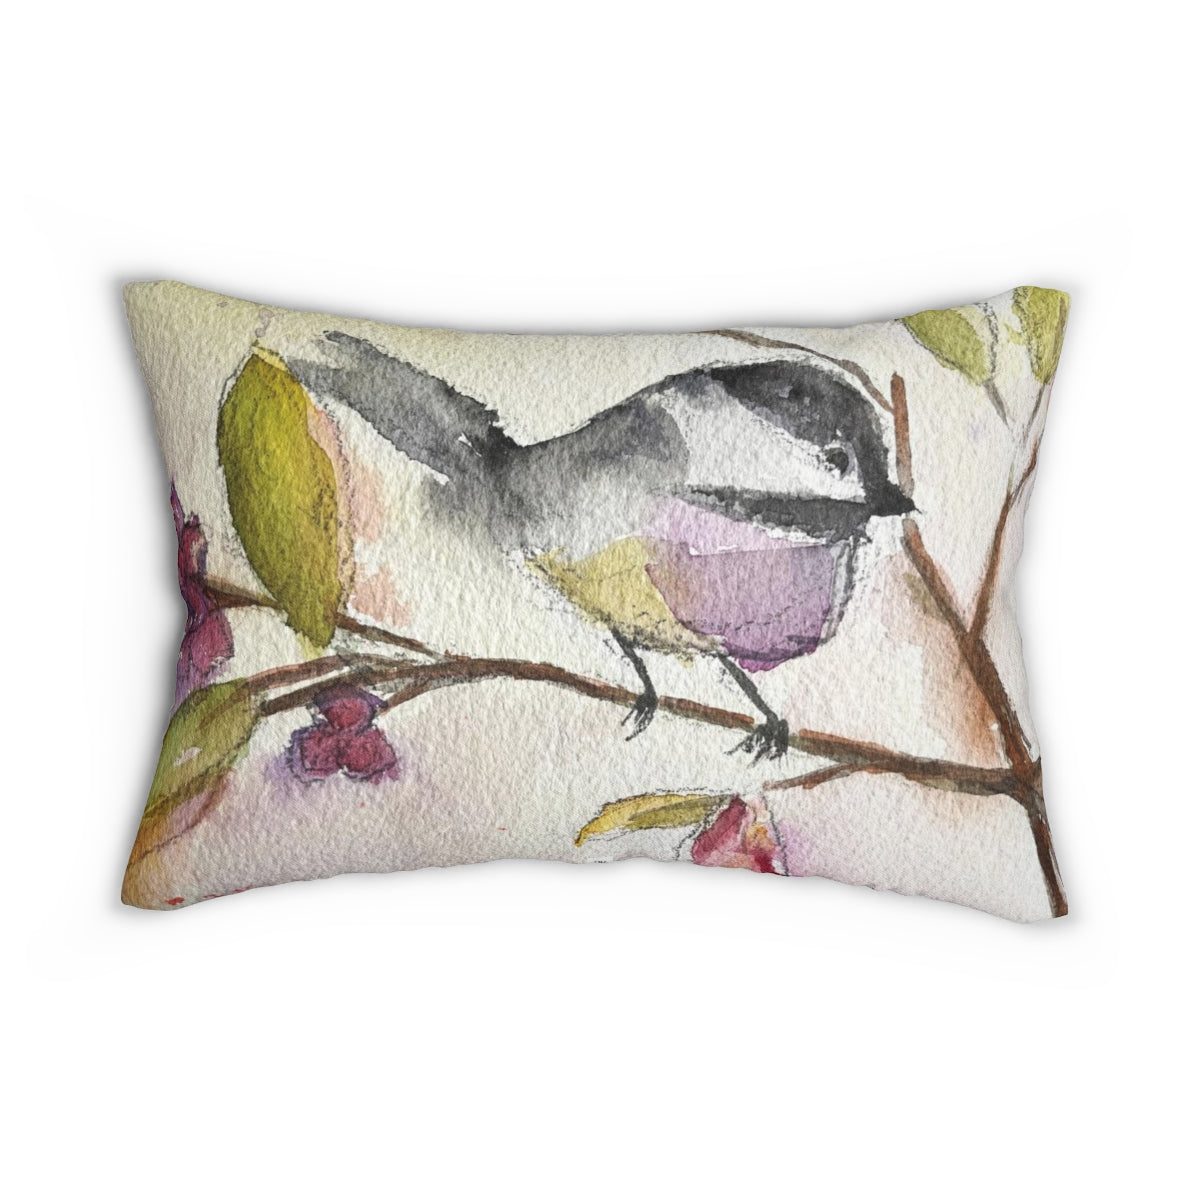 Chickadee Perched in a Berry Tree Lumbar Pillow